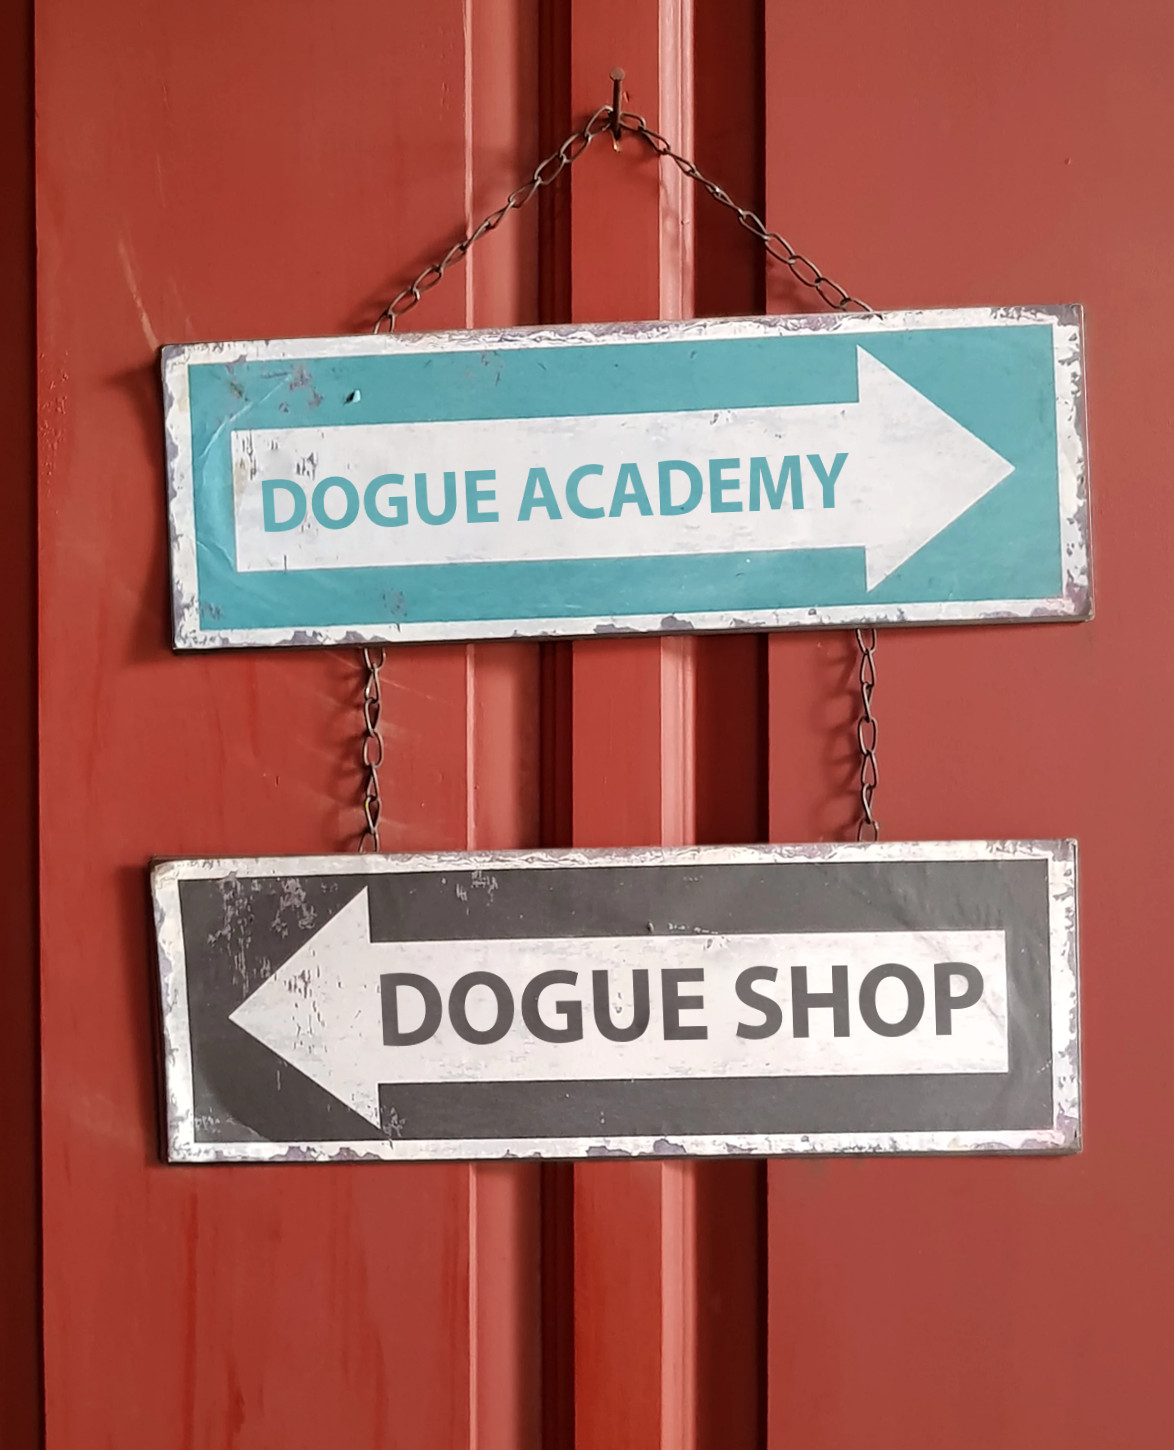 Dogue Shop and Dogue Academy street sign hanging on door